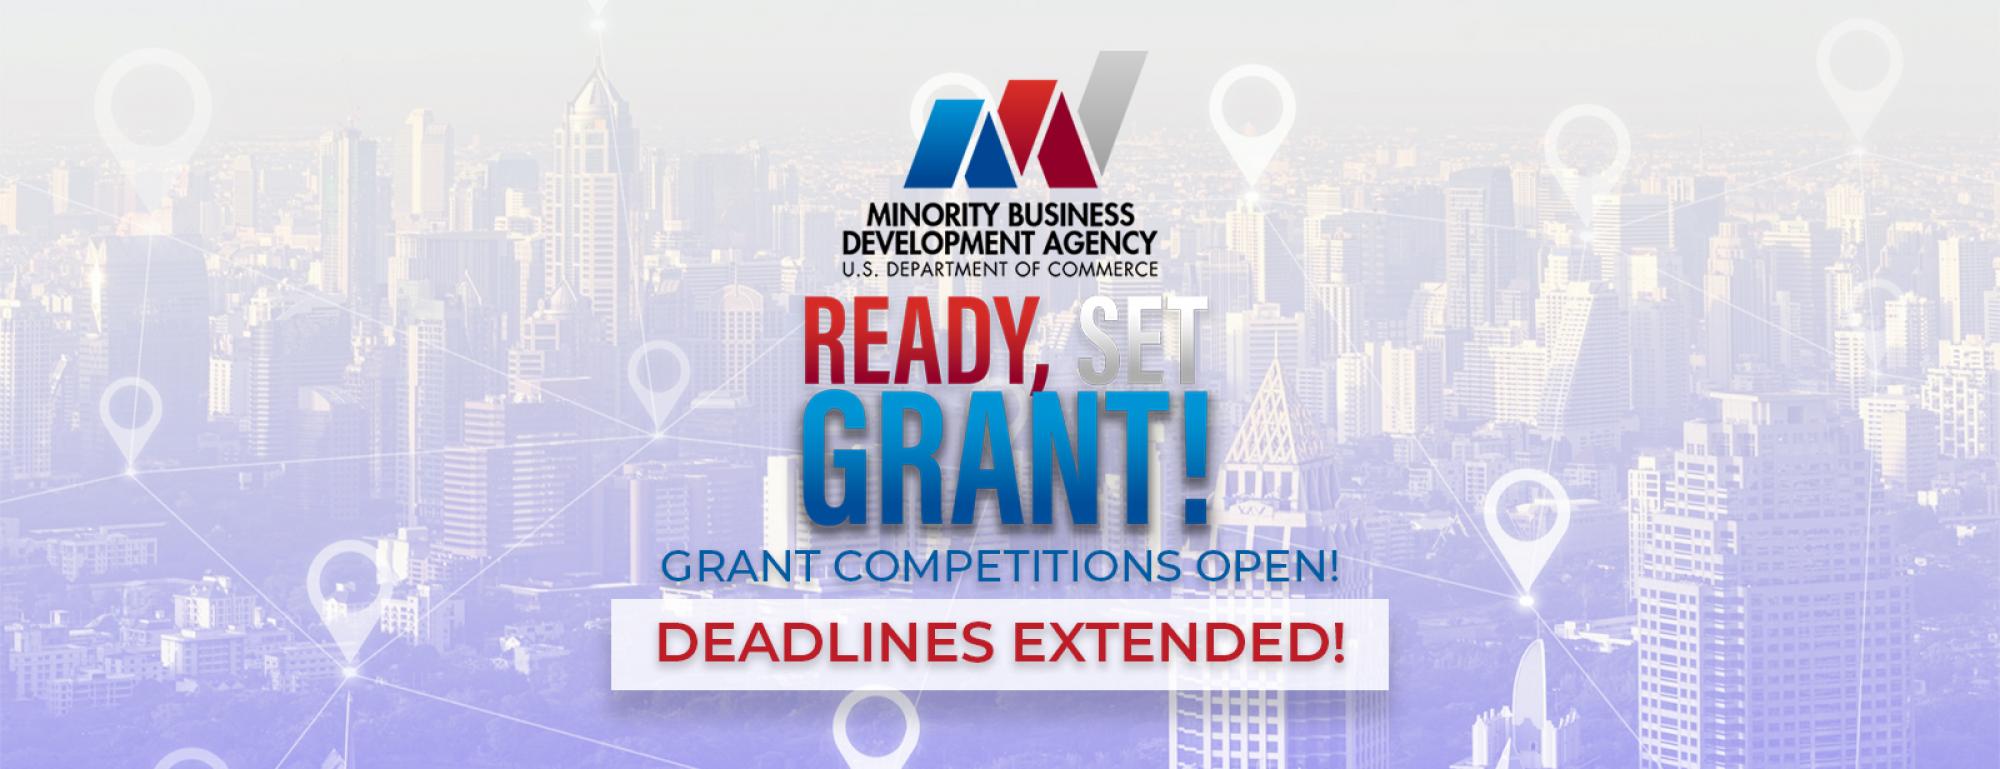 Grant Competition Open! Deadlines Extended